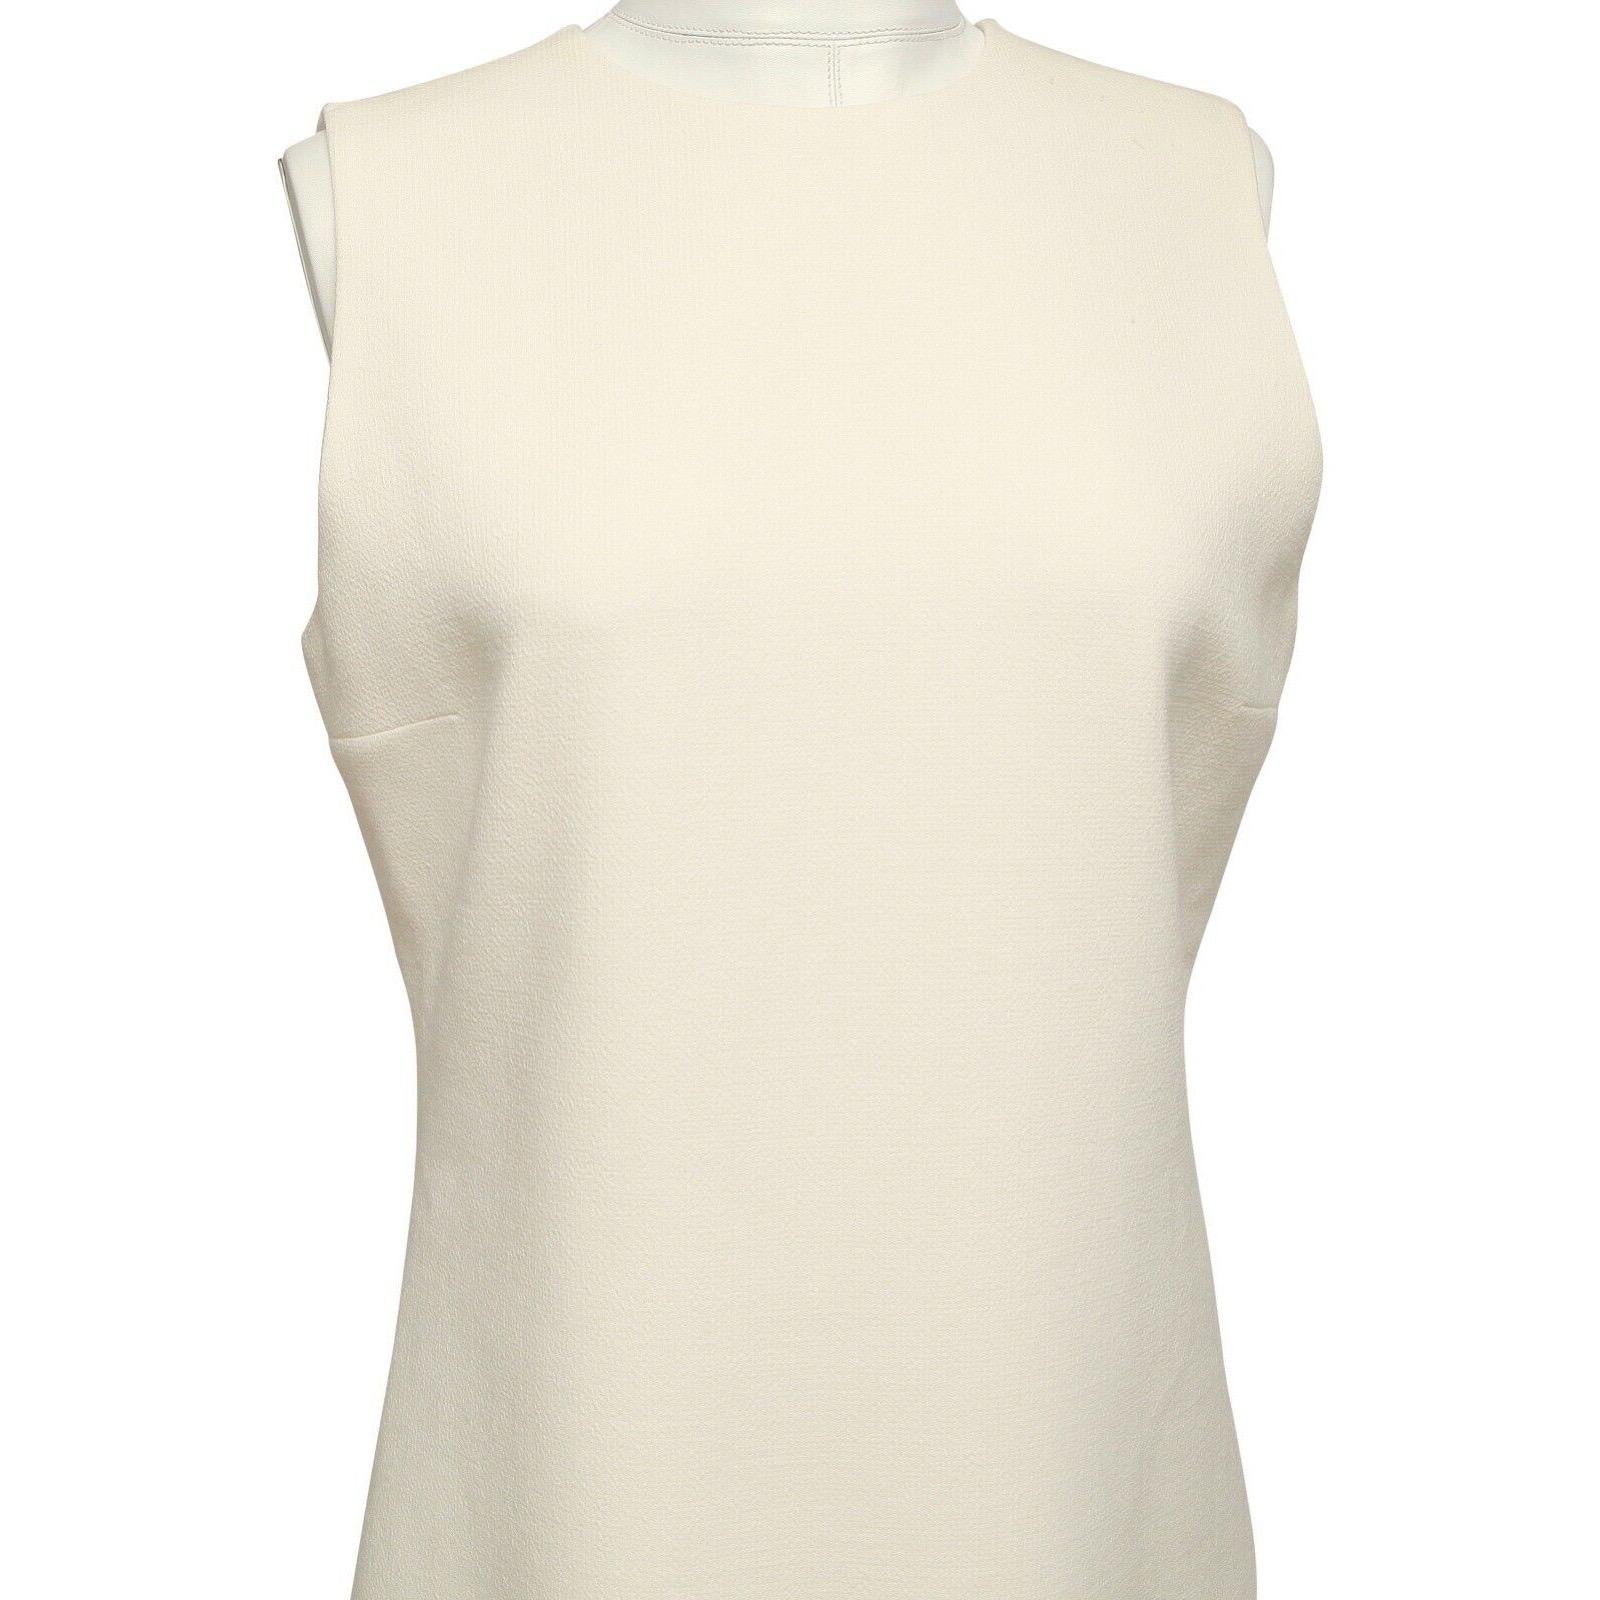 VICTORIA VICTORIA BECKHAM Ivory Dress Sleeveless Wool Crepe Flared Sz M In Good Condition For Sale In Hollywood, FL